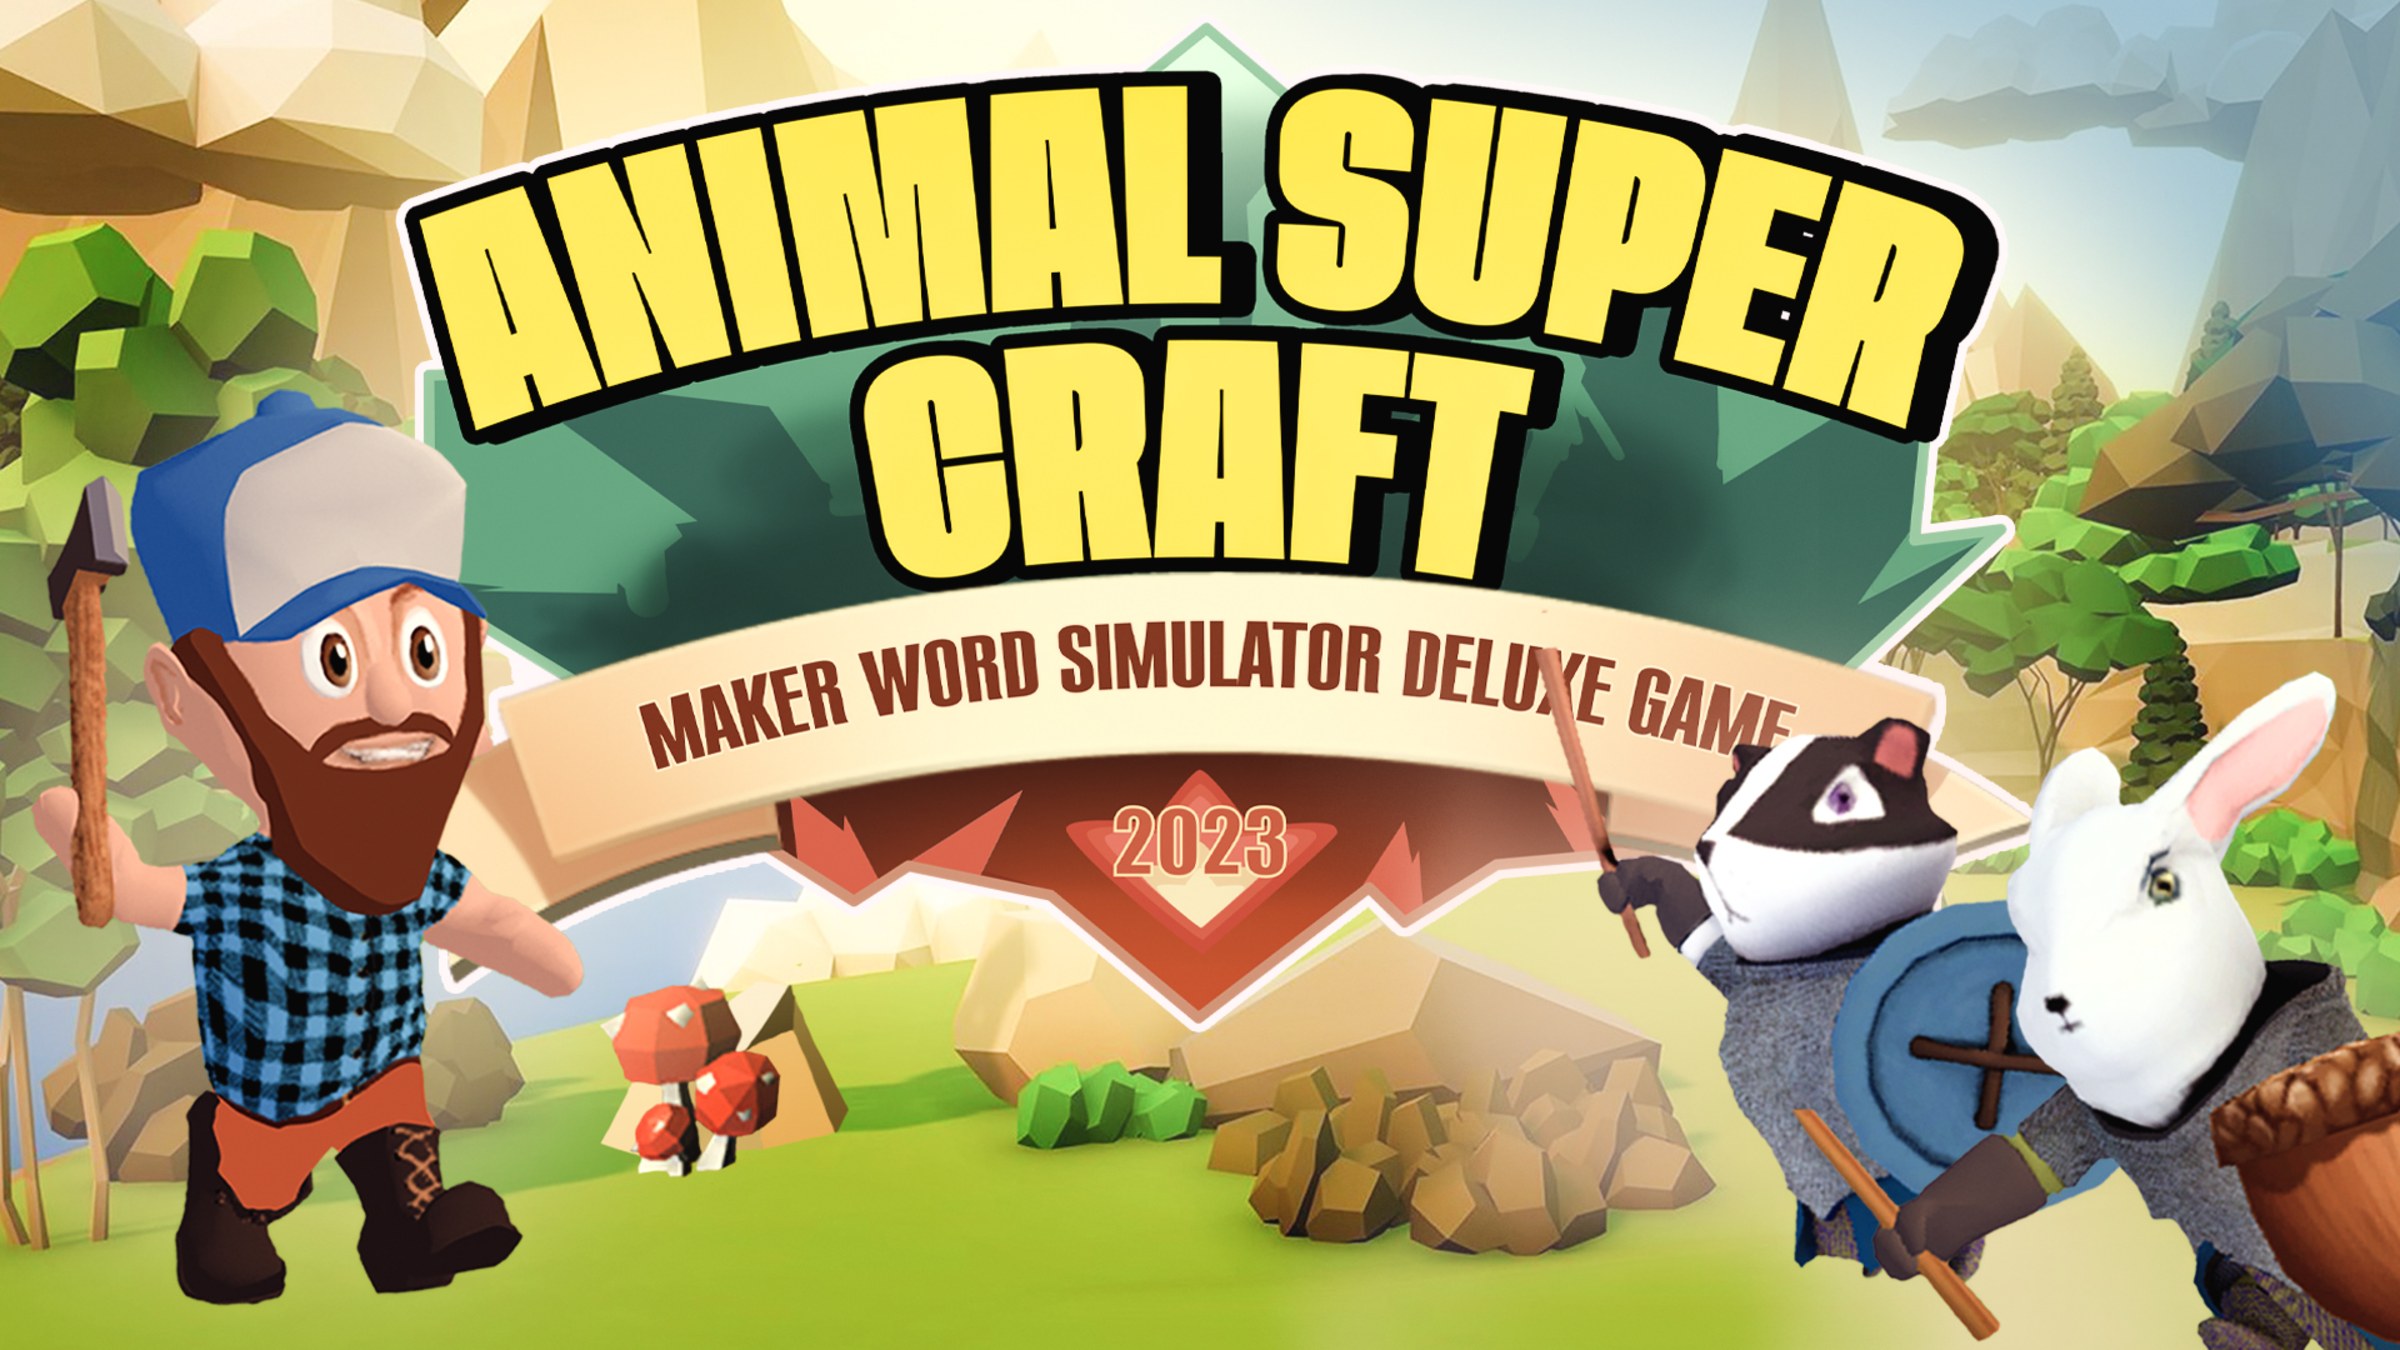 https://assets.nintendo.com/image/upload/c_fill,w_1200/q_auto:best/f_auto/dpr_2.0/ncom/en_US/games/switch/a/animal-super-craft-maker-word-simulator-deluxe-game-2023-switch/